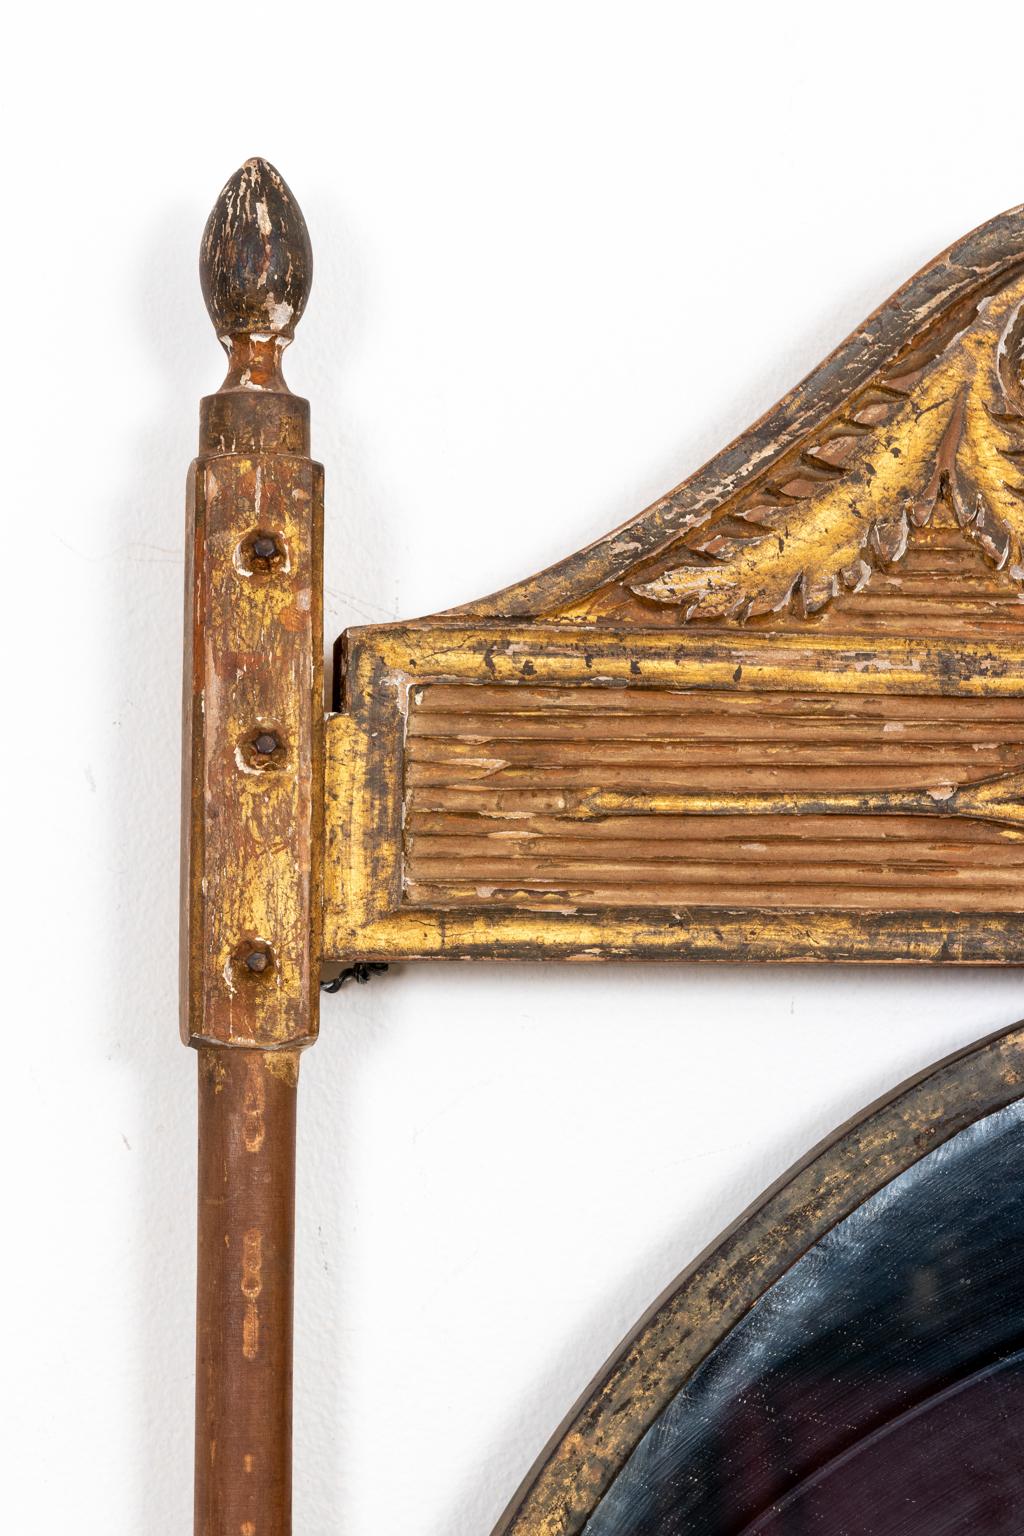 Circa 1820s Neoclassical style carved and gilded mirror with original patina on crisply carved wood with traces of gilded over bole and gesso. The piece was probably originally used as a sign as seen in the metal center oval, now replaced with a